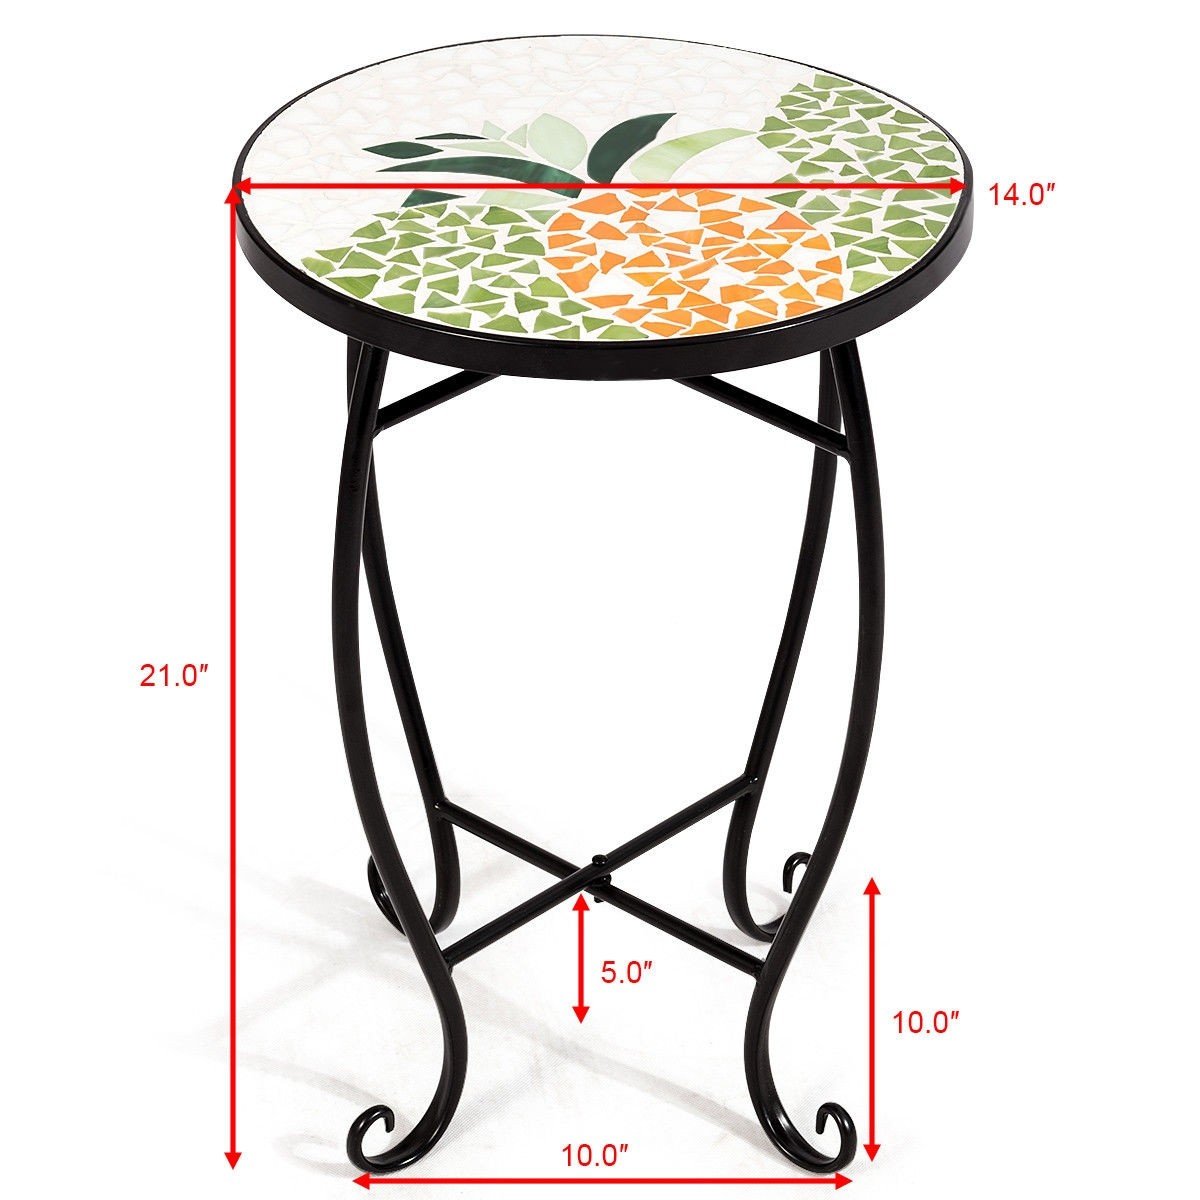 custpromo mosaic accent table metal round side garden plant stand cobalt glass top indoor outdoor patio sweet pineapple kitchen end marble style couch back furniture ikea high